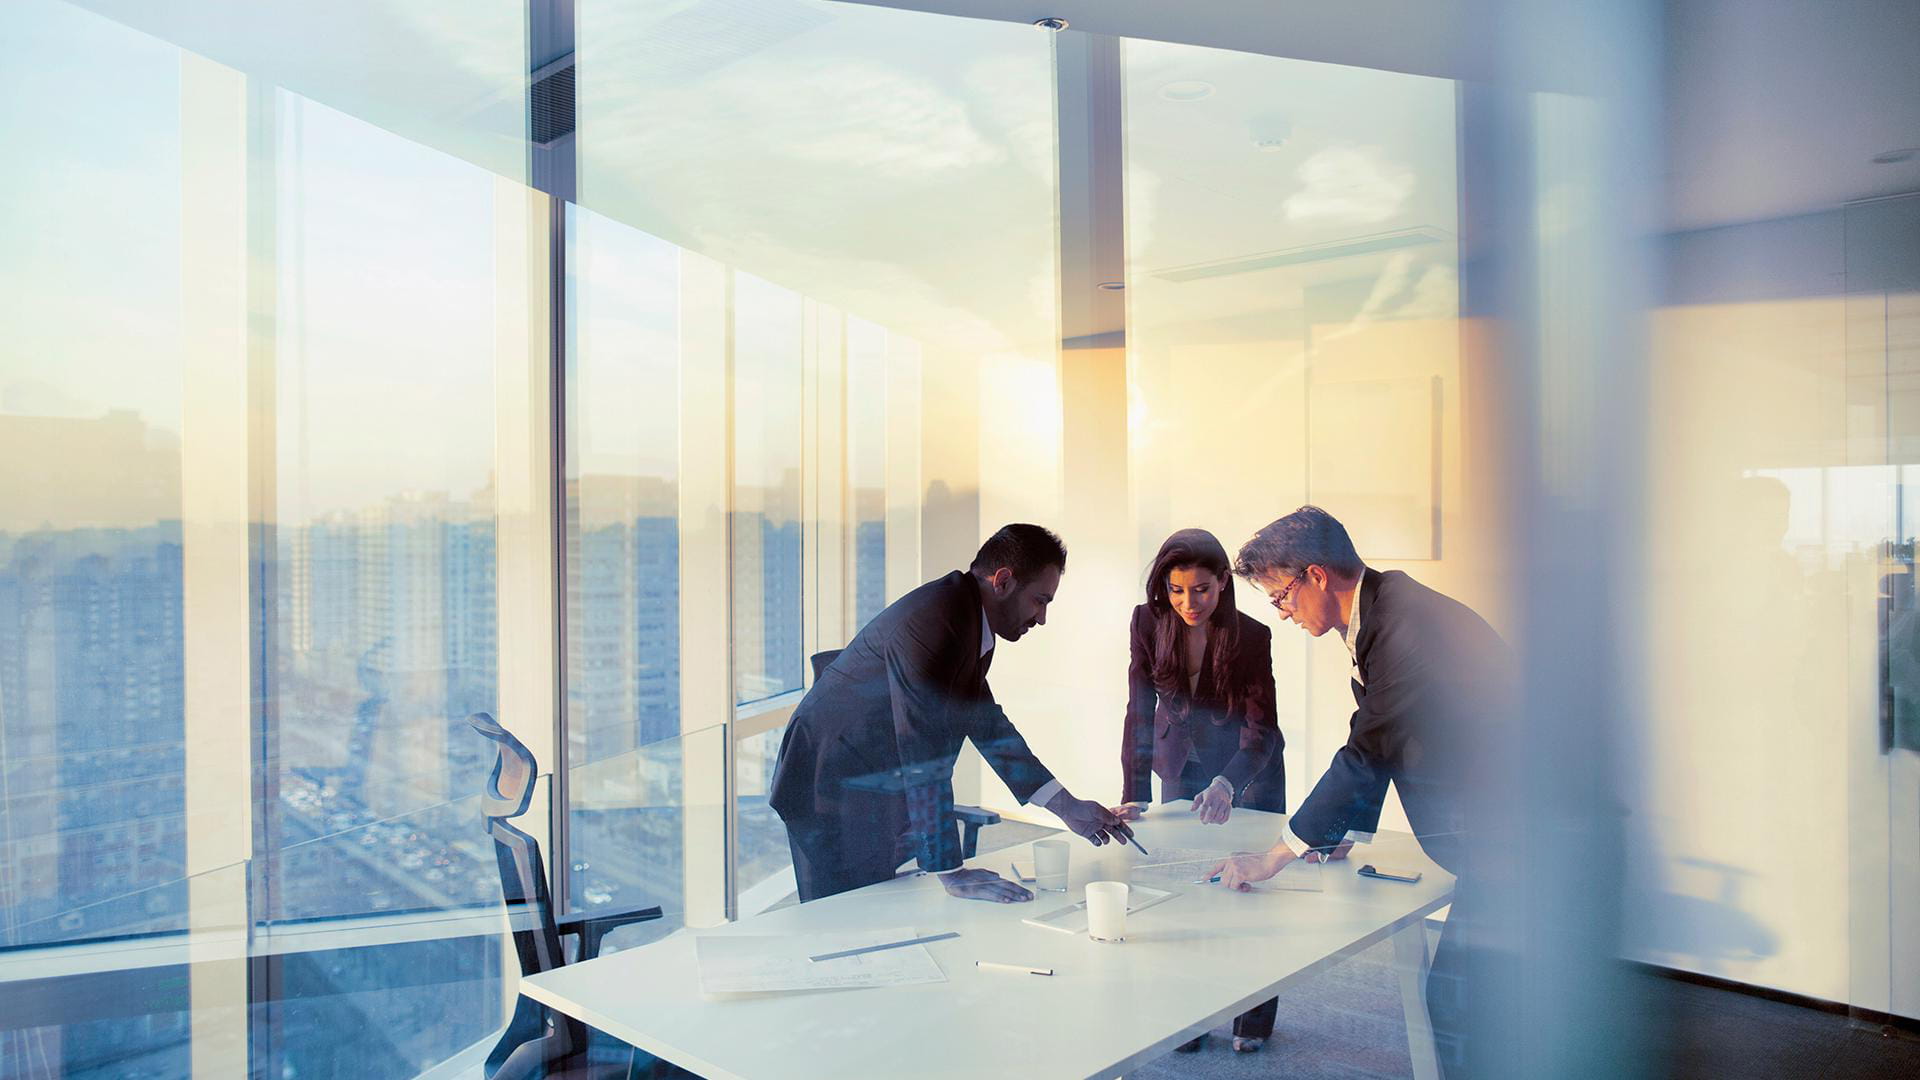 Business colleagues planning together in meeting - stock photo